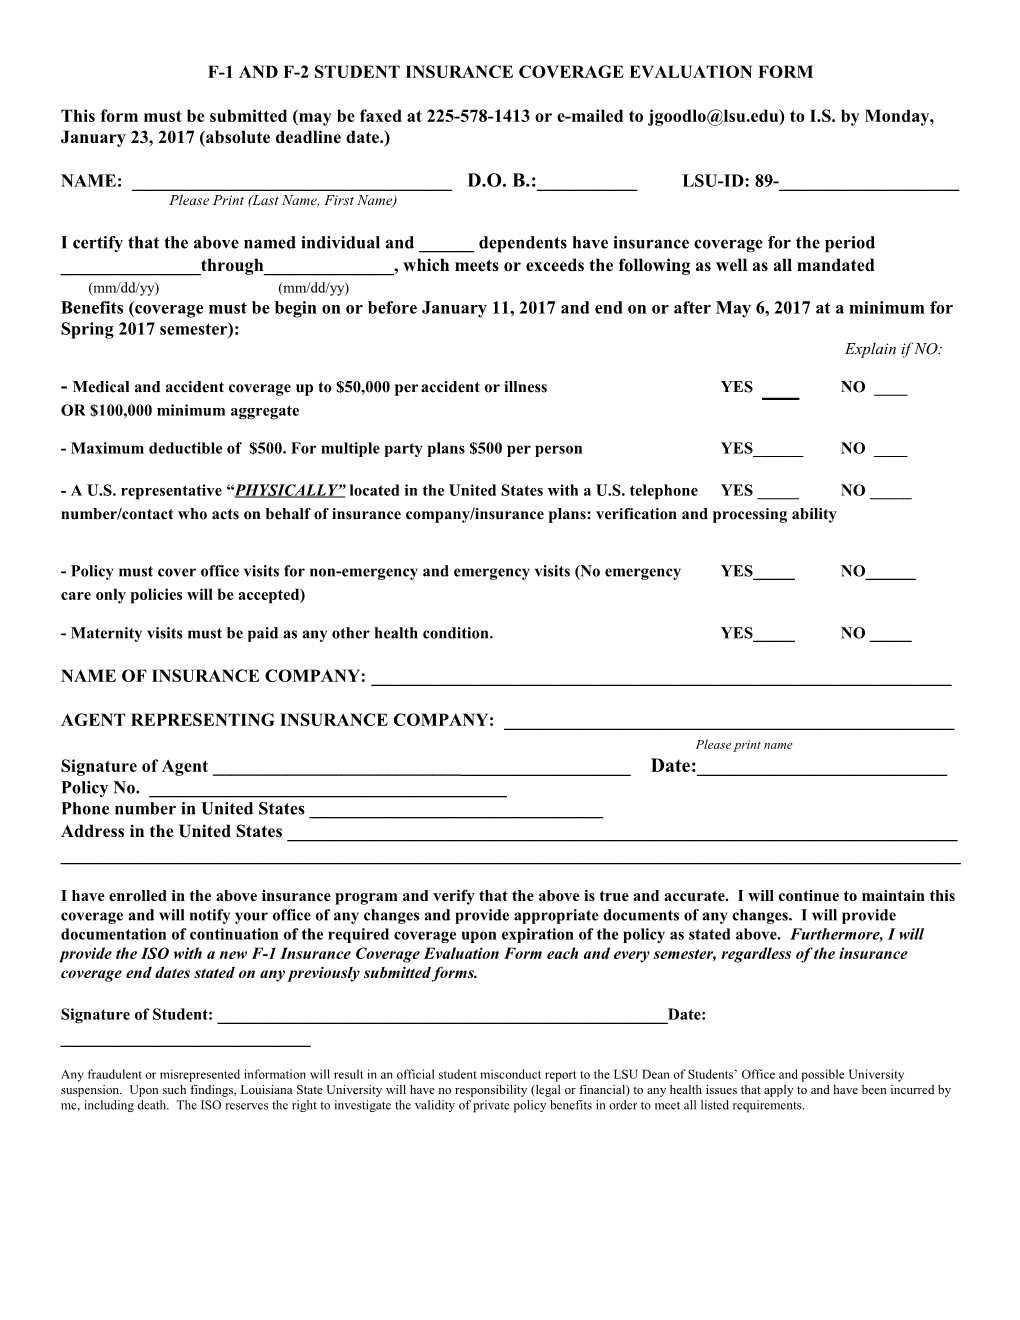 F-1 and F-2 Student Insurance Coverage Evaluation Form